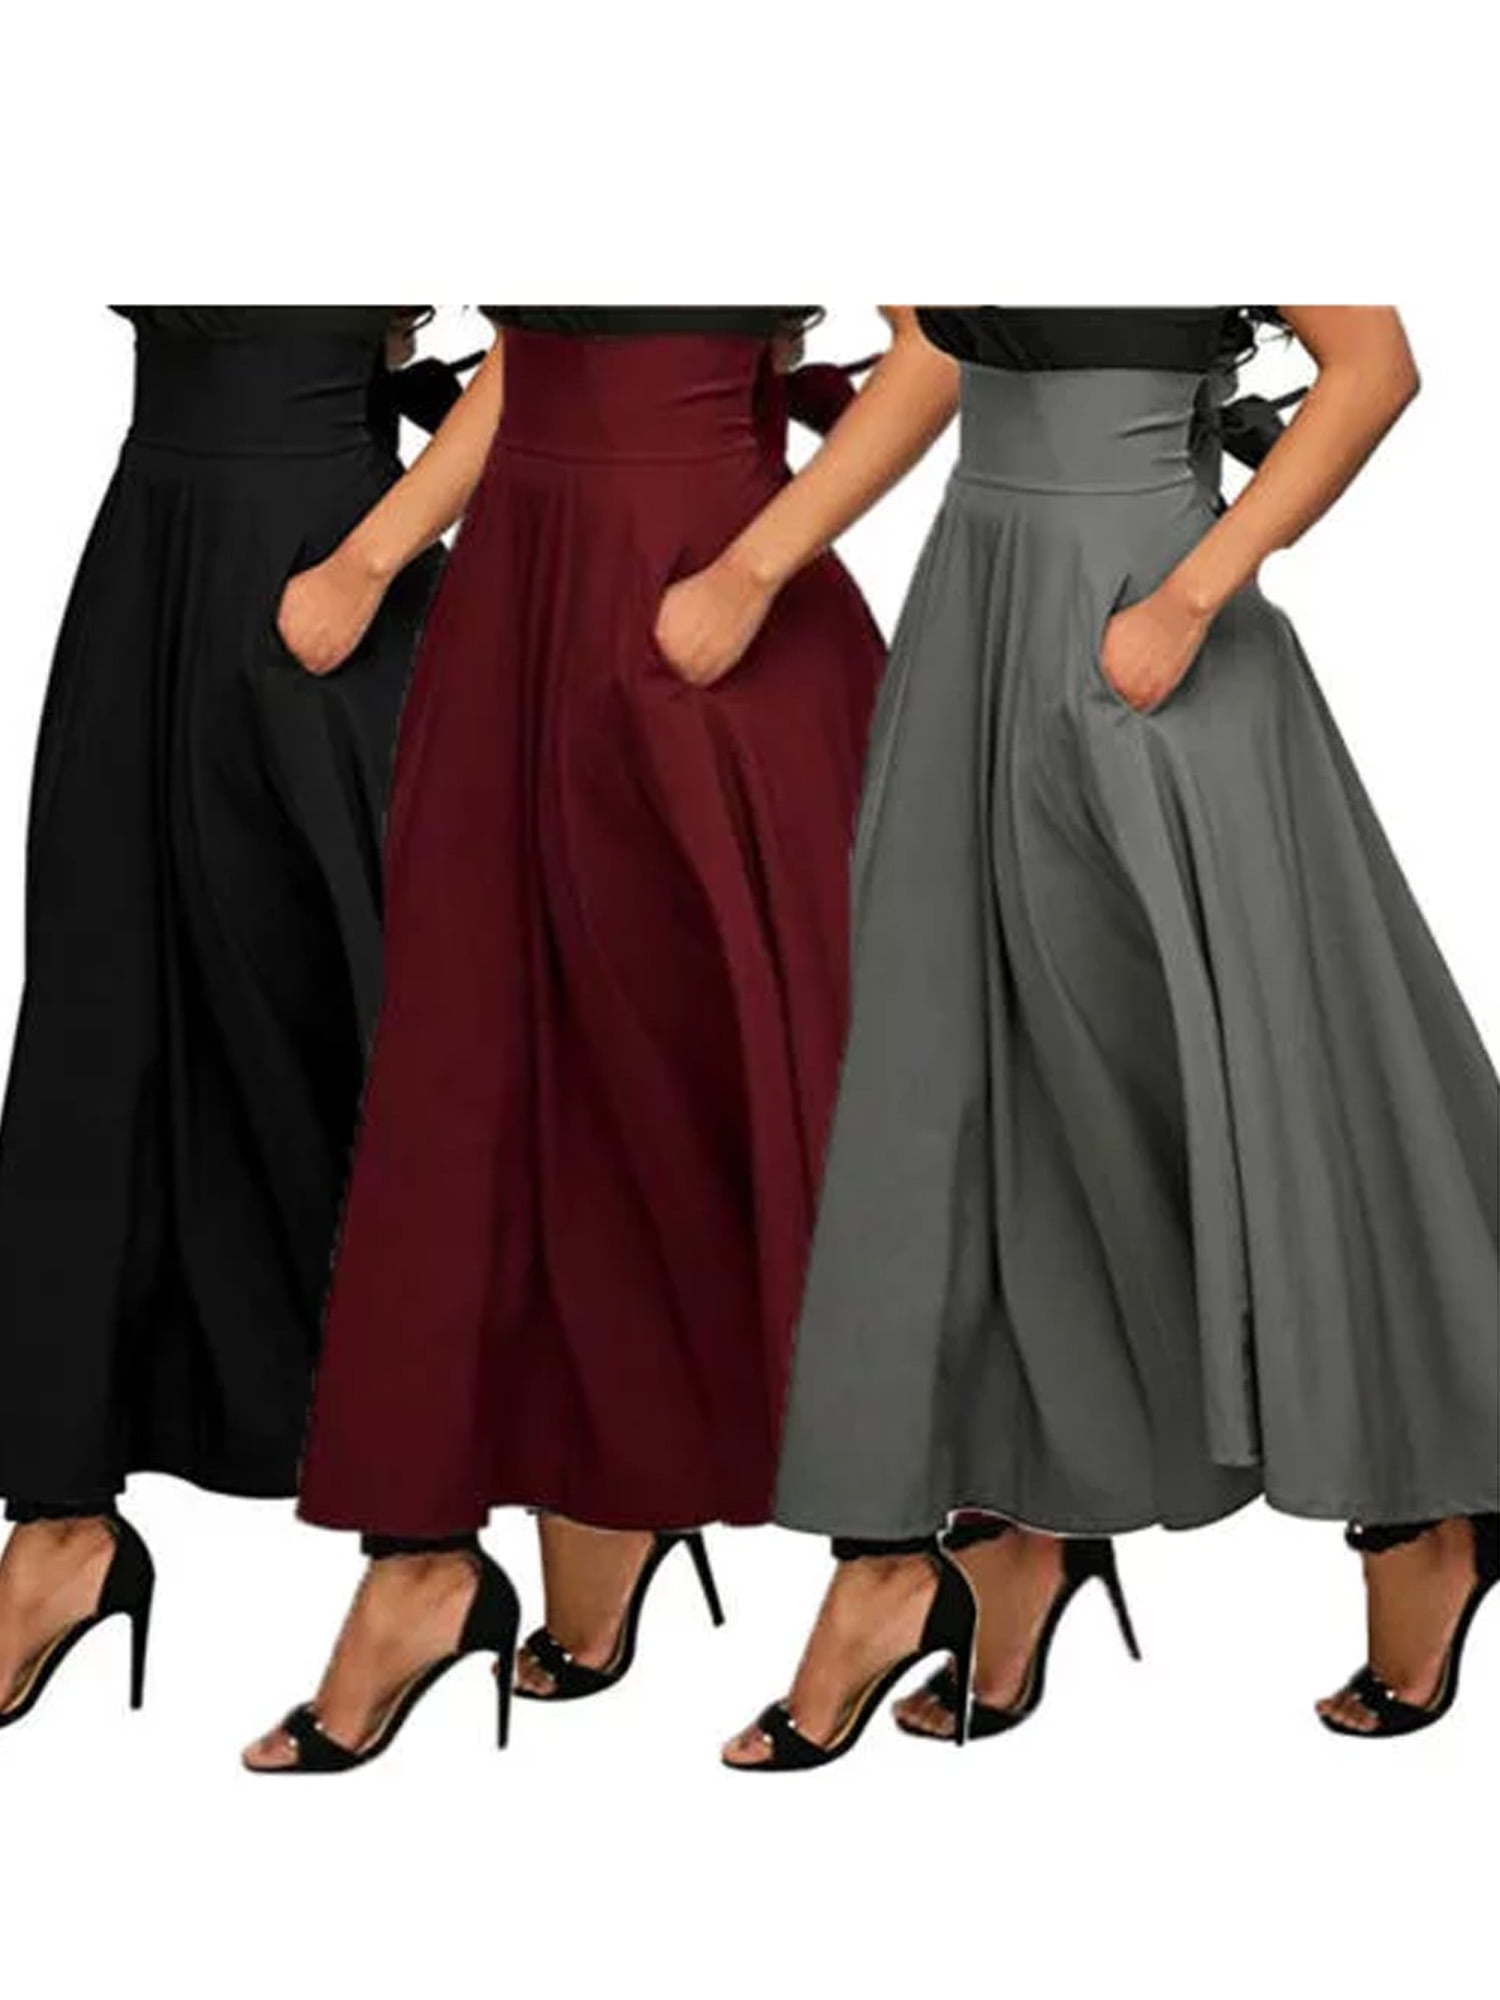 4 Trending Long Skirt Outfits For Women - Learn To Style Long Skirts With  Tops - Bewakoof Blog